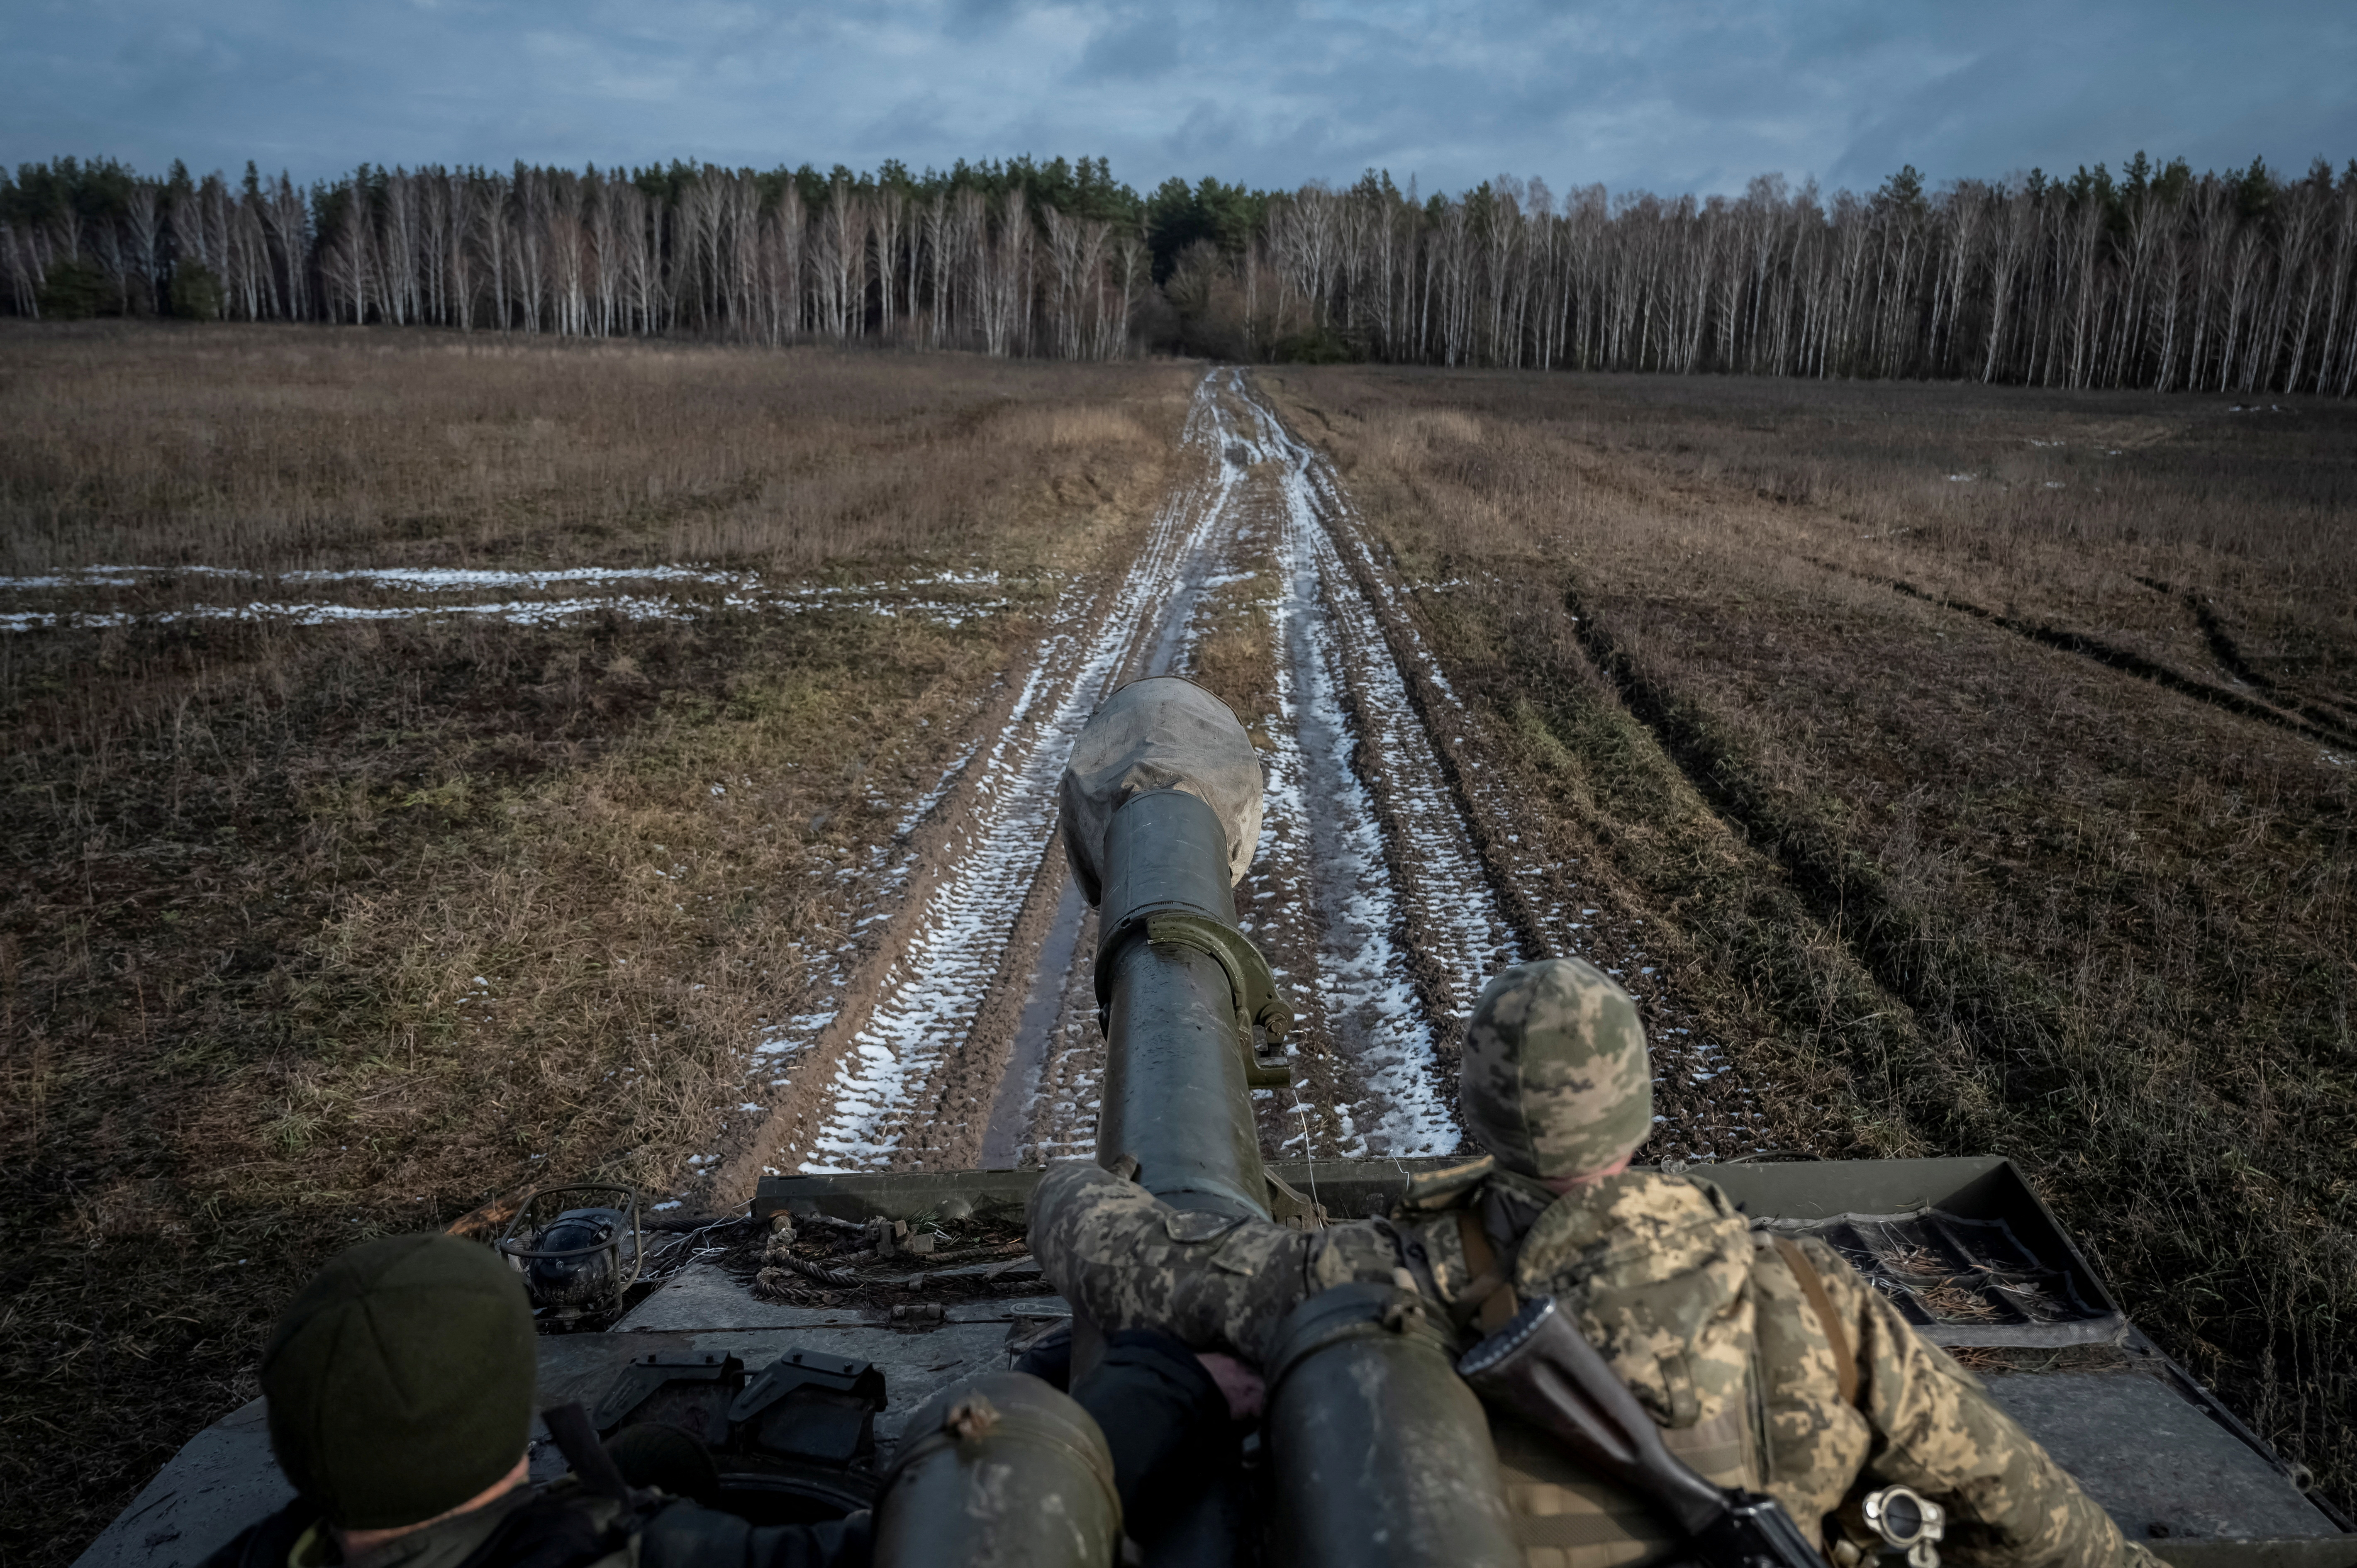 Ukrainian servicemen attend a drill of armed forces at the border with Belarus near Chornobyl